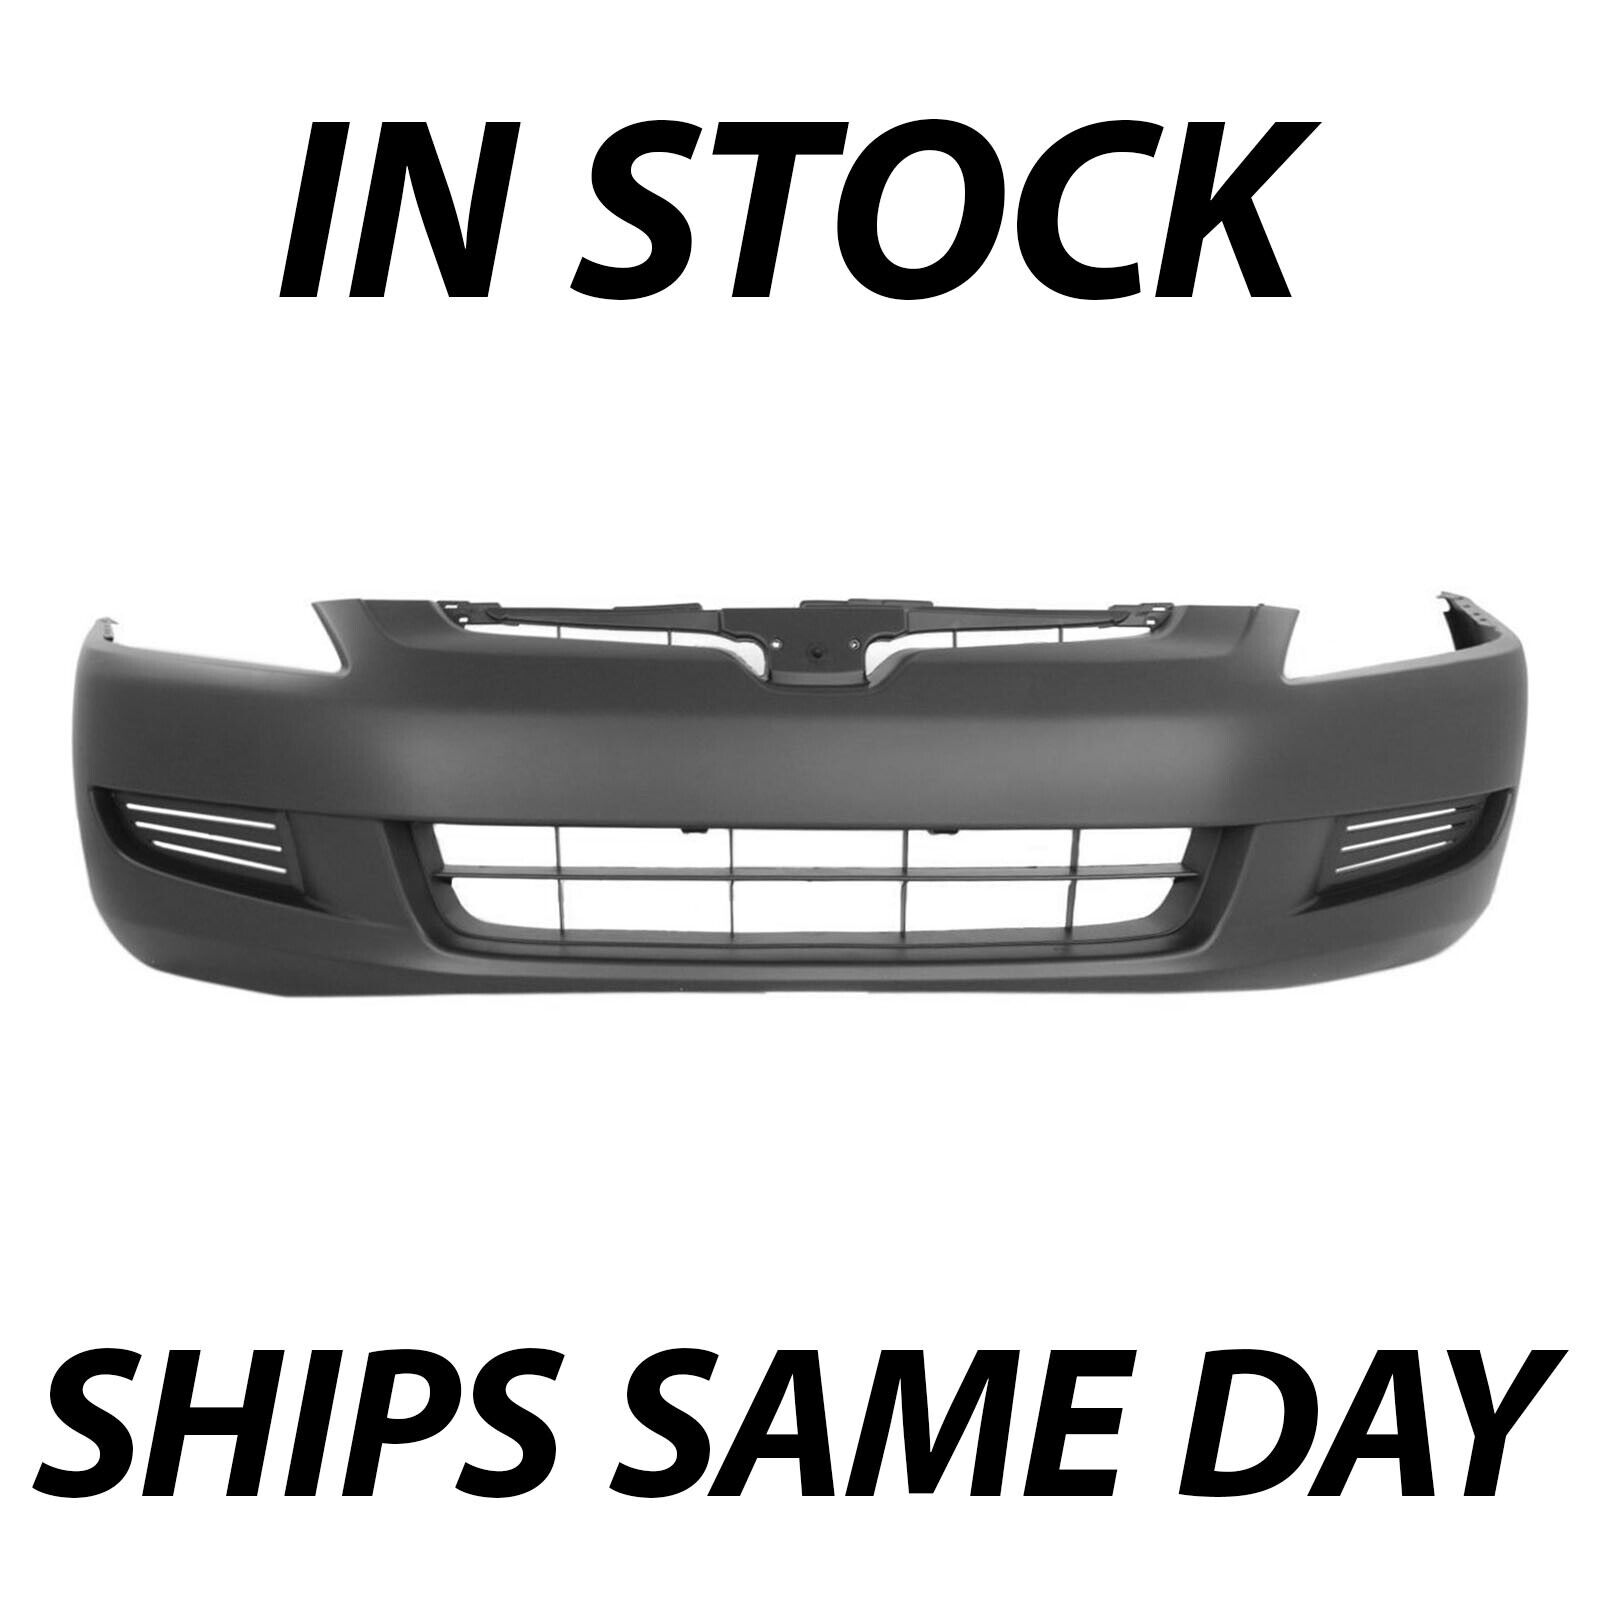 NEW Primered - Front Bumper Cover Fascia for 2003 2004 2005 Honda Accord Coupe